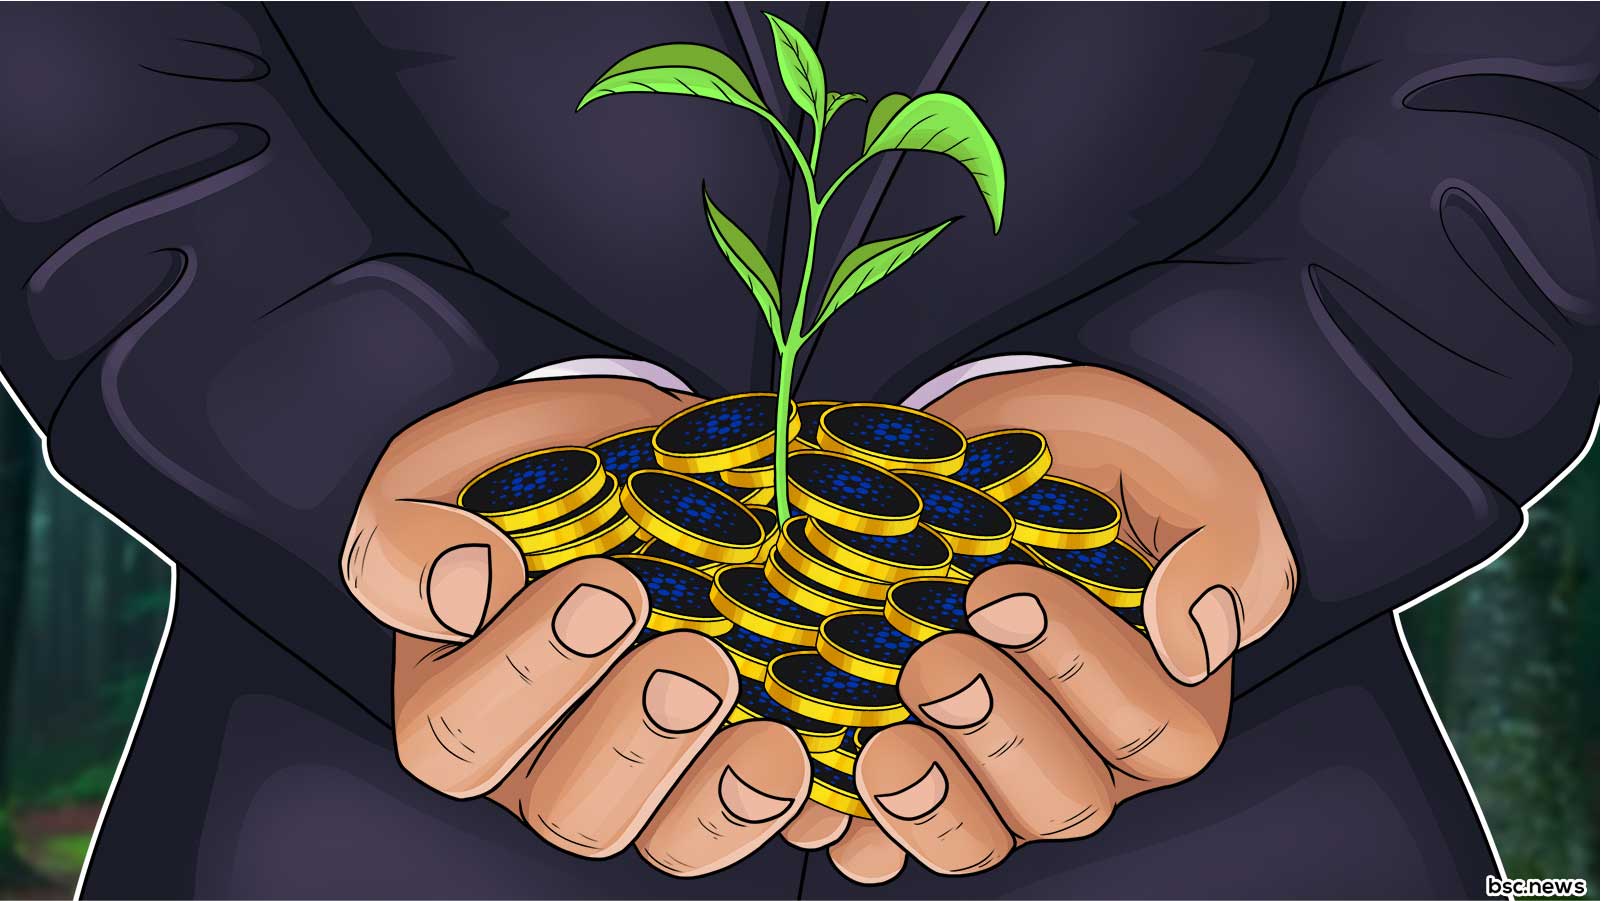 Cardano Foundation Completes Funding To Plant 1 Million Trees